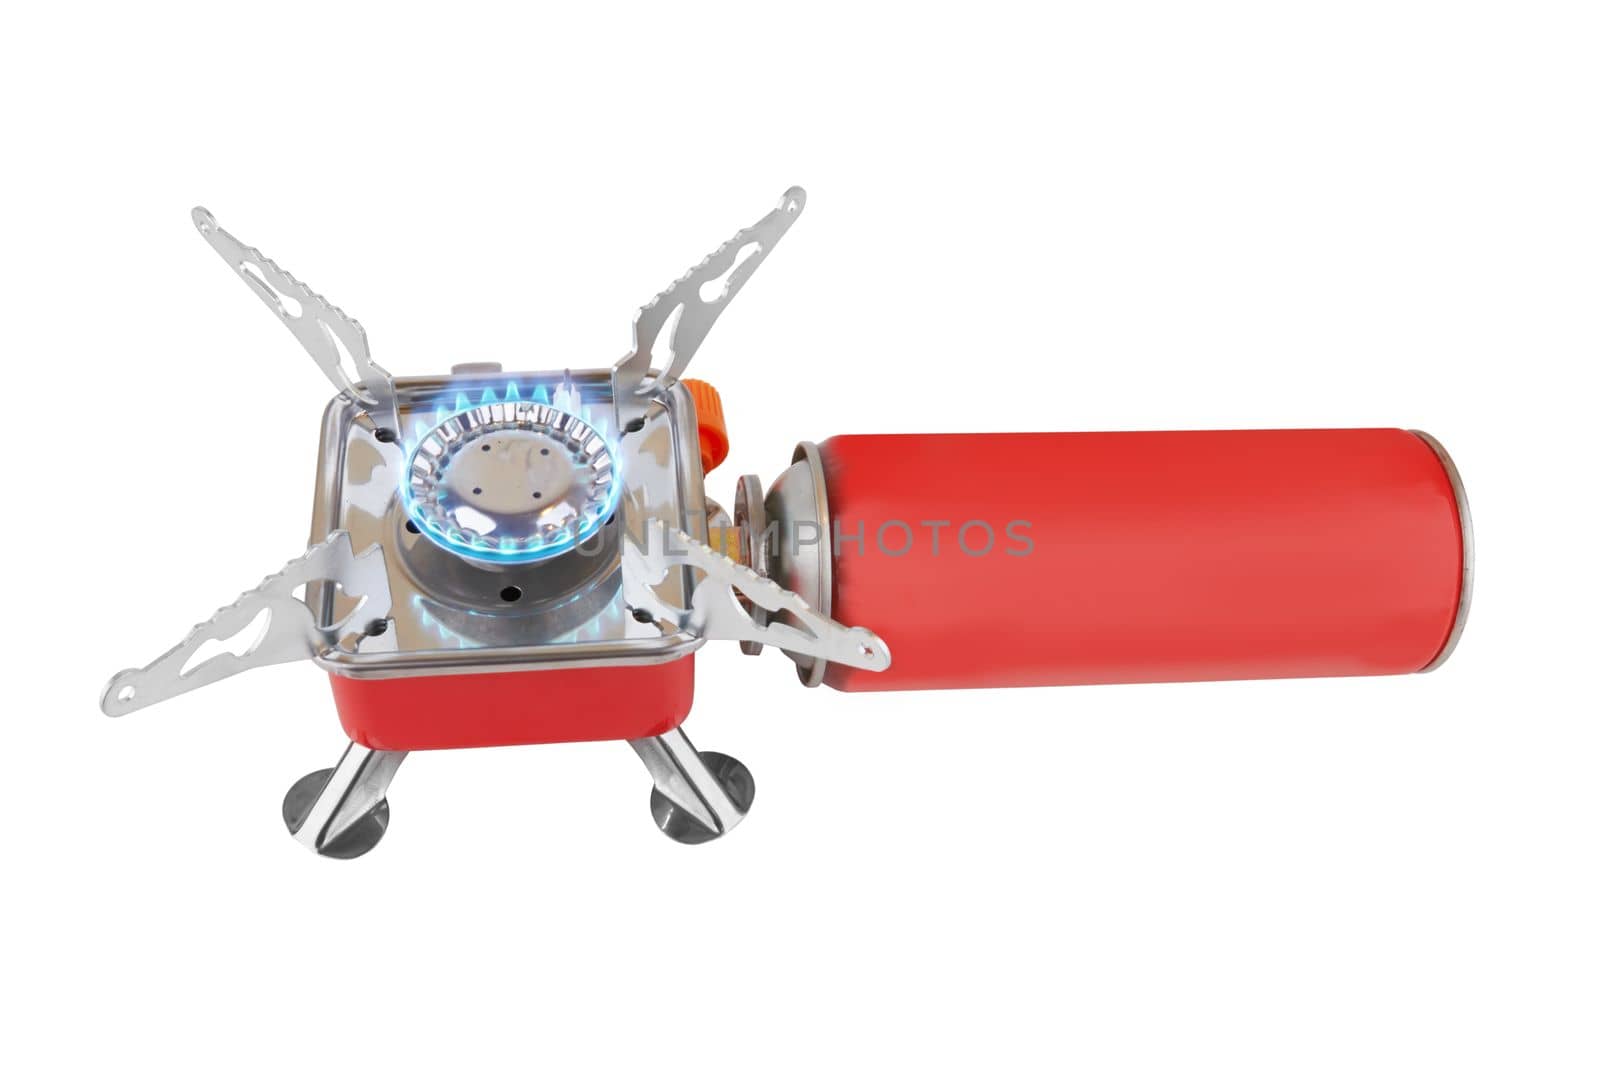 Camping gas stove by pioneer111